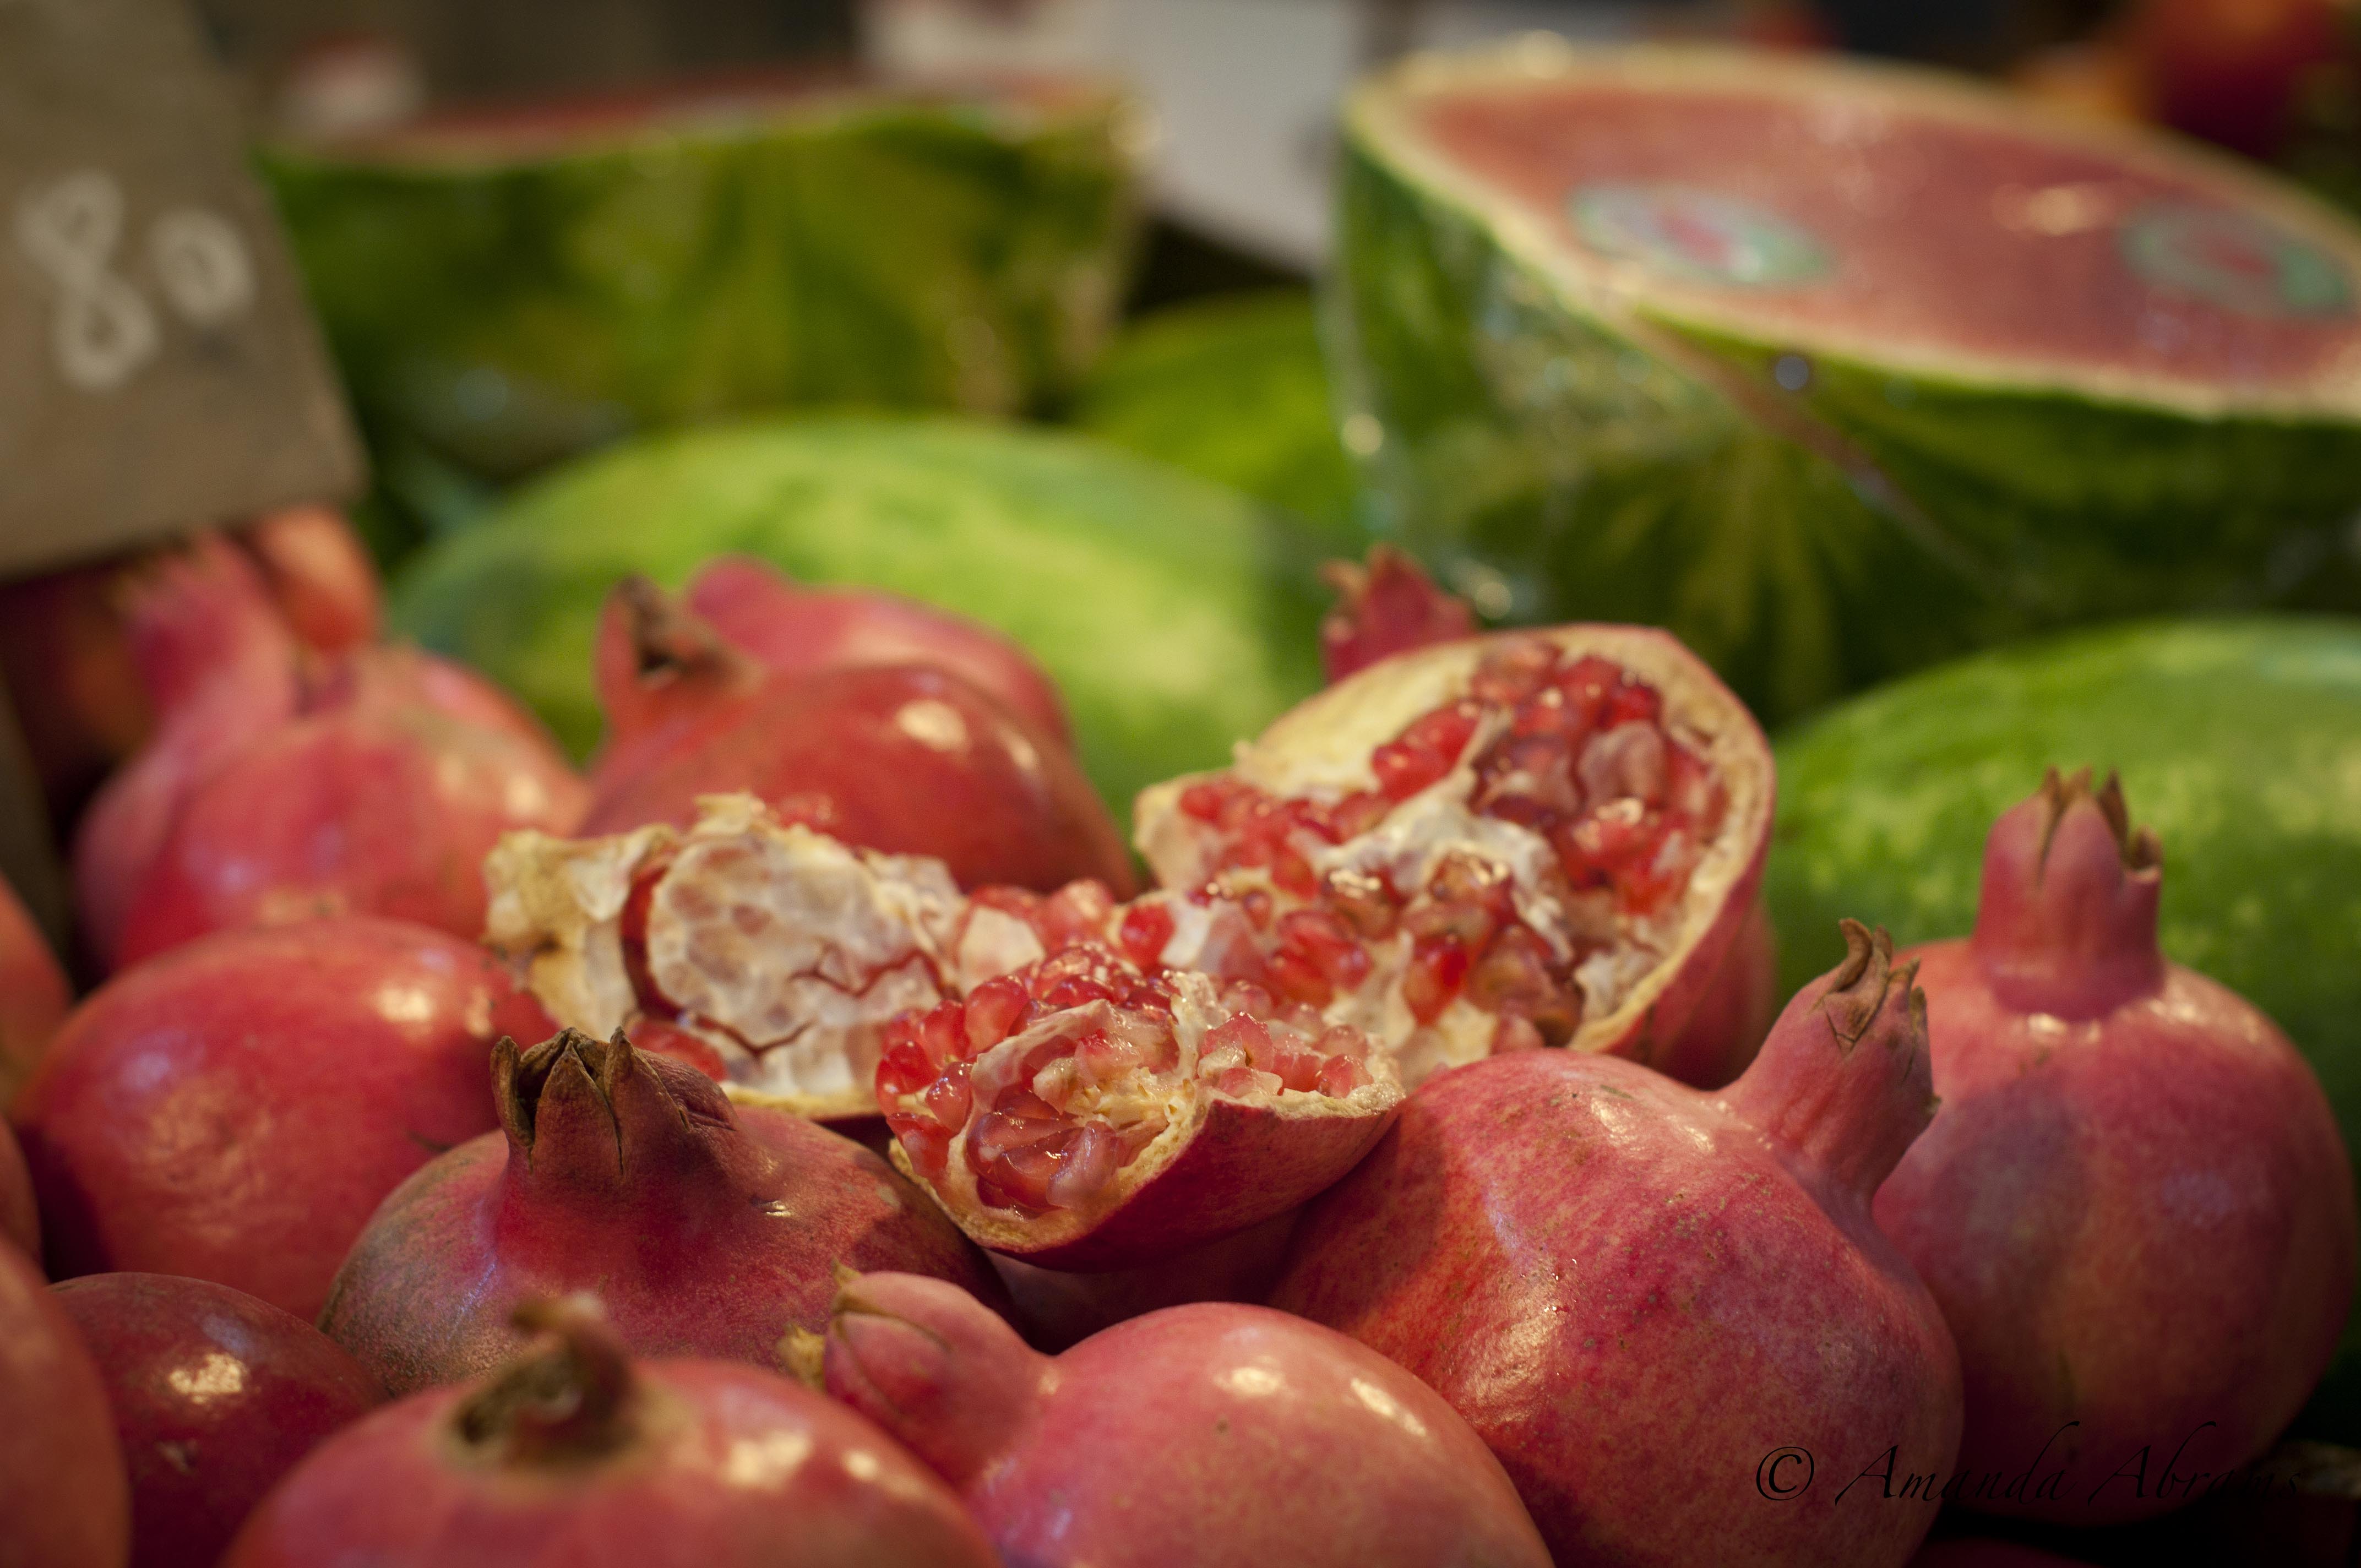 Pomegranate for sale in the market.